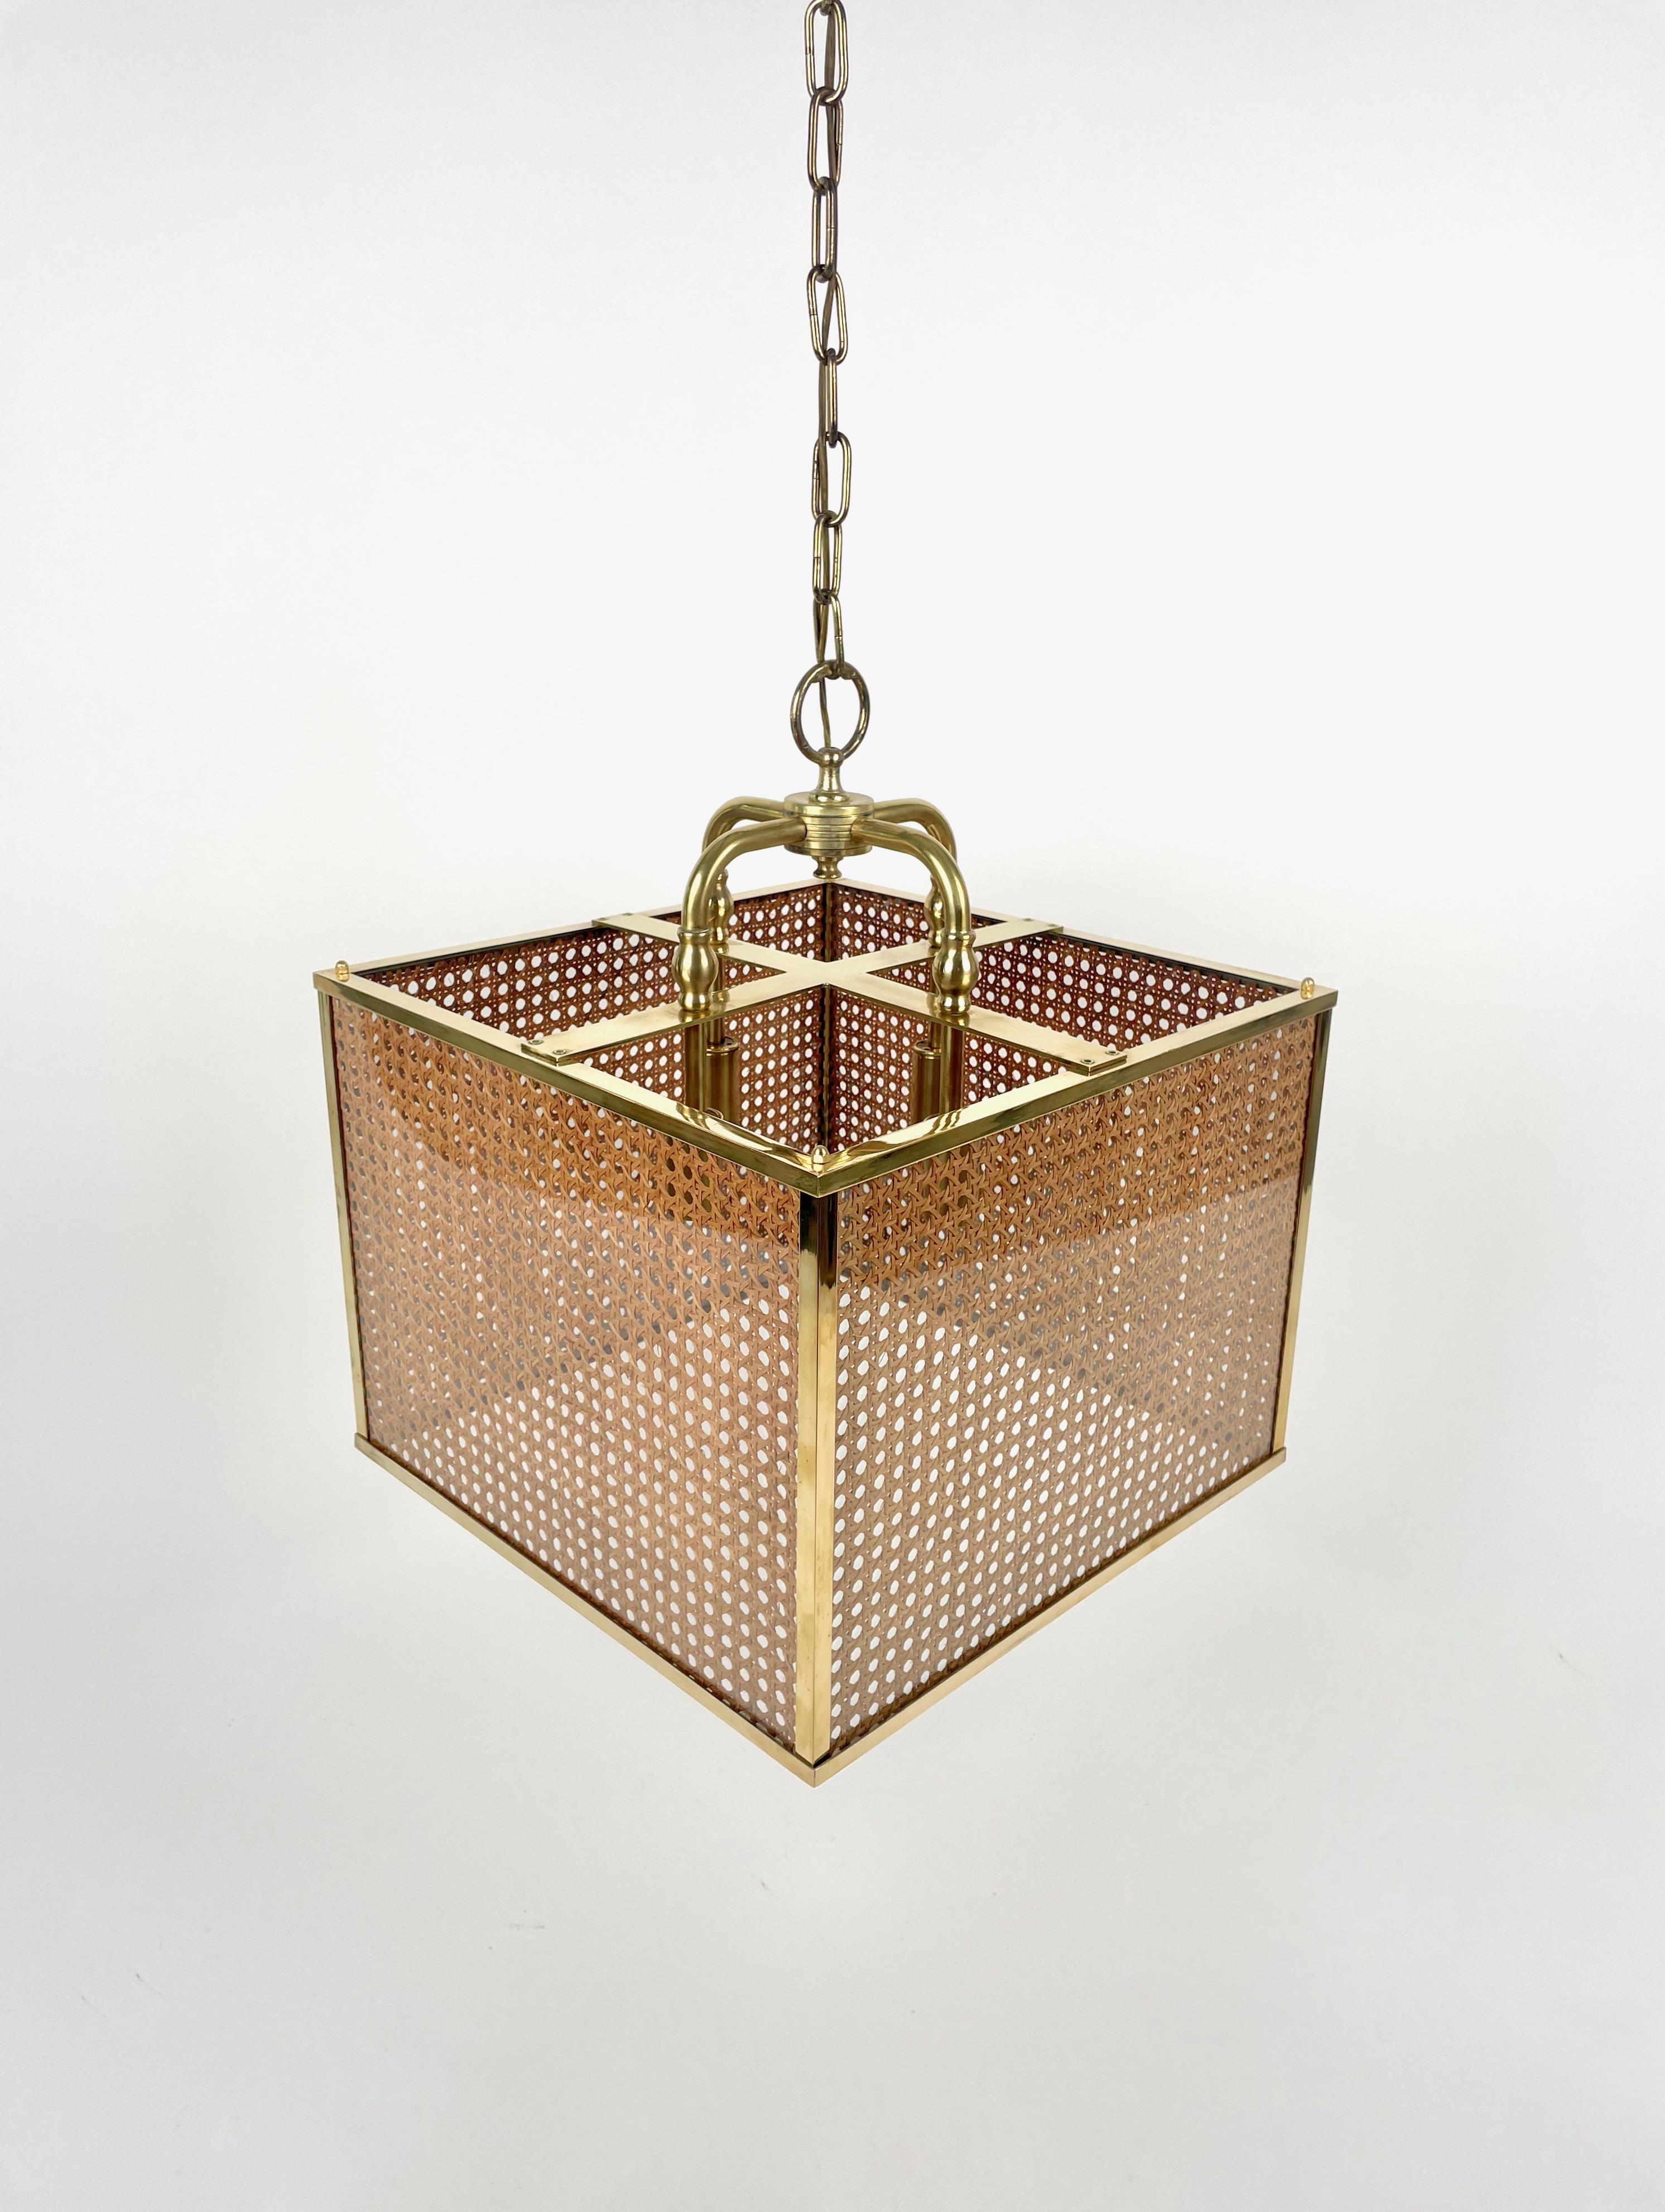 Italian Rattan, Brass and Glass Chandelier Four-Light, Italy 1970s For Sale